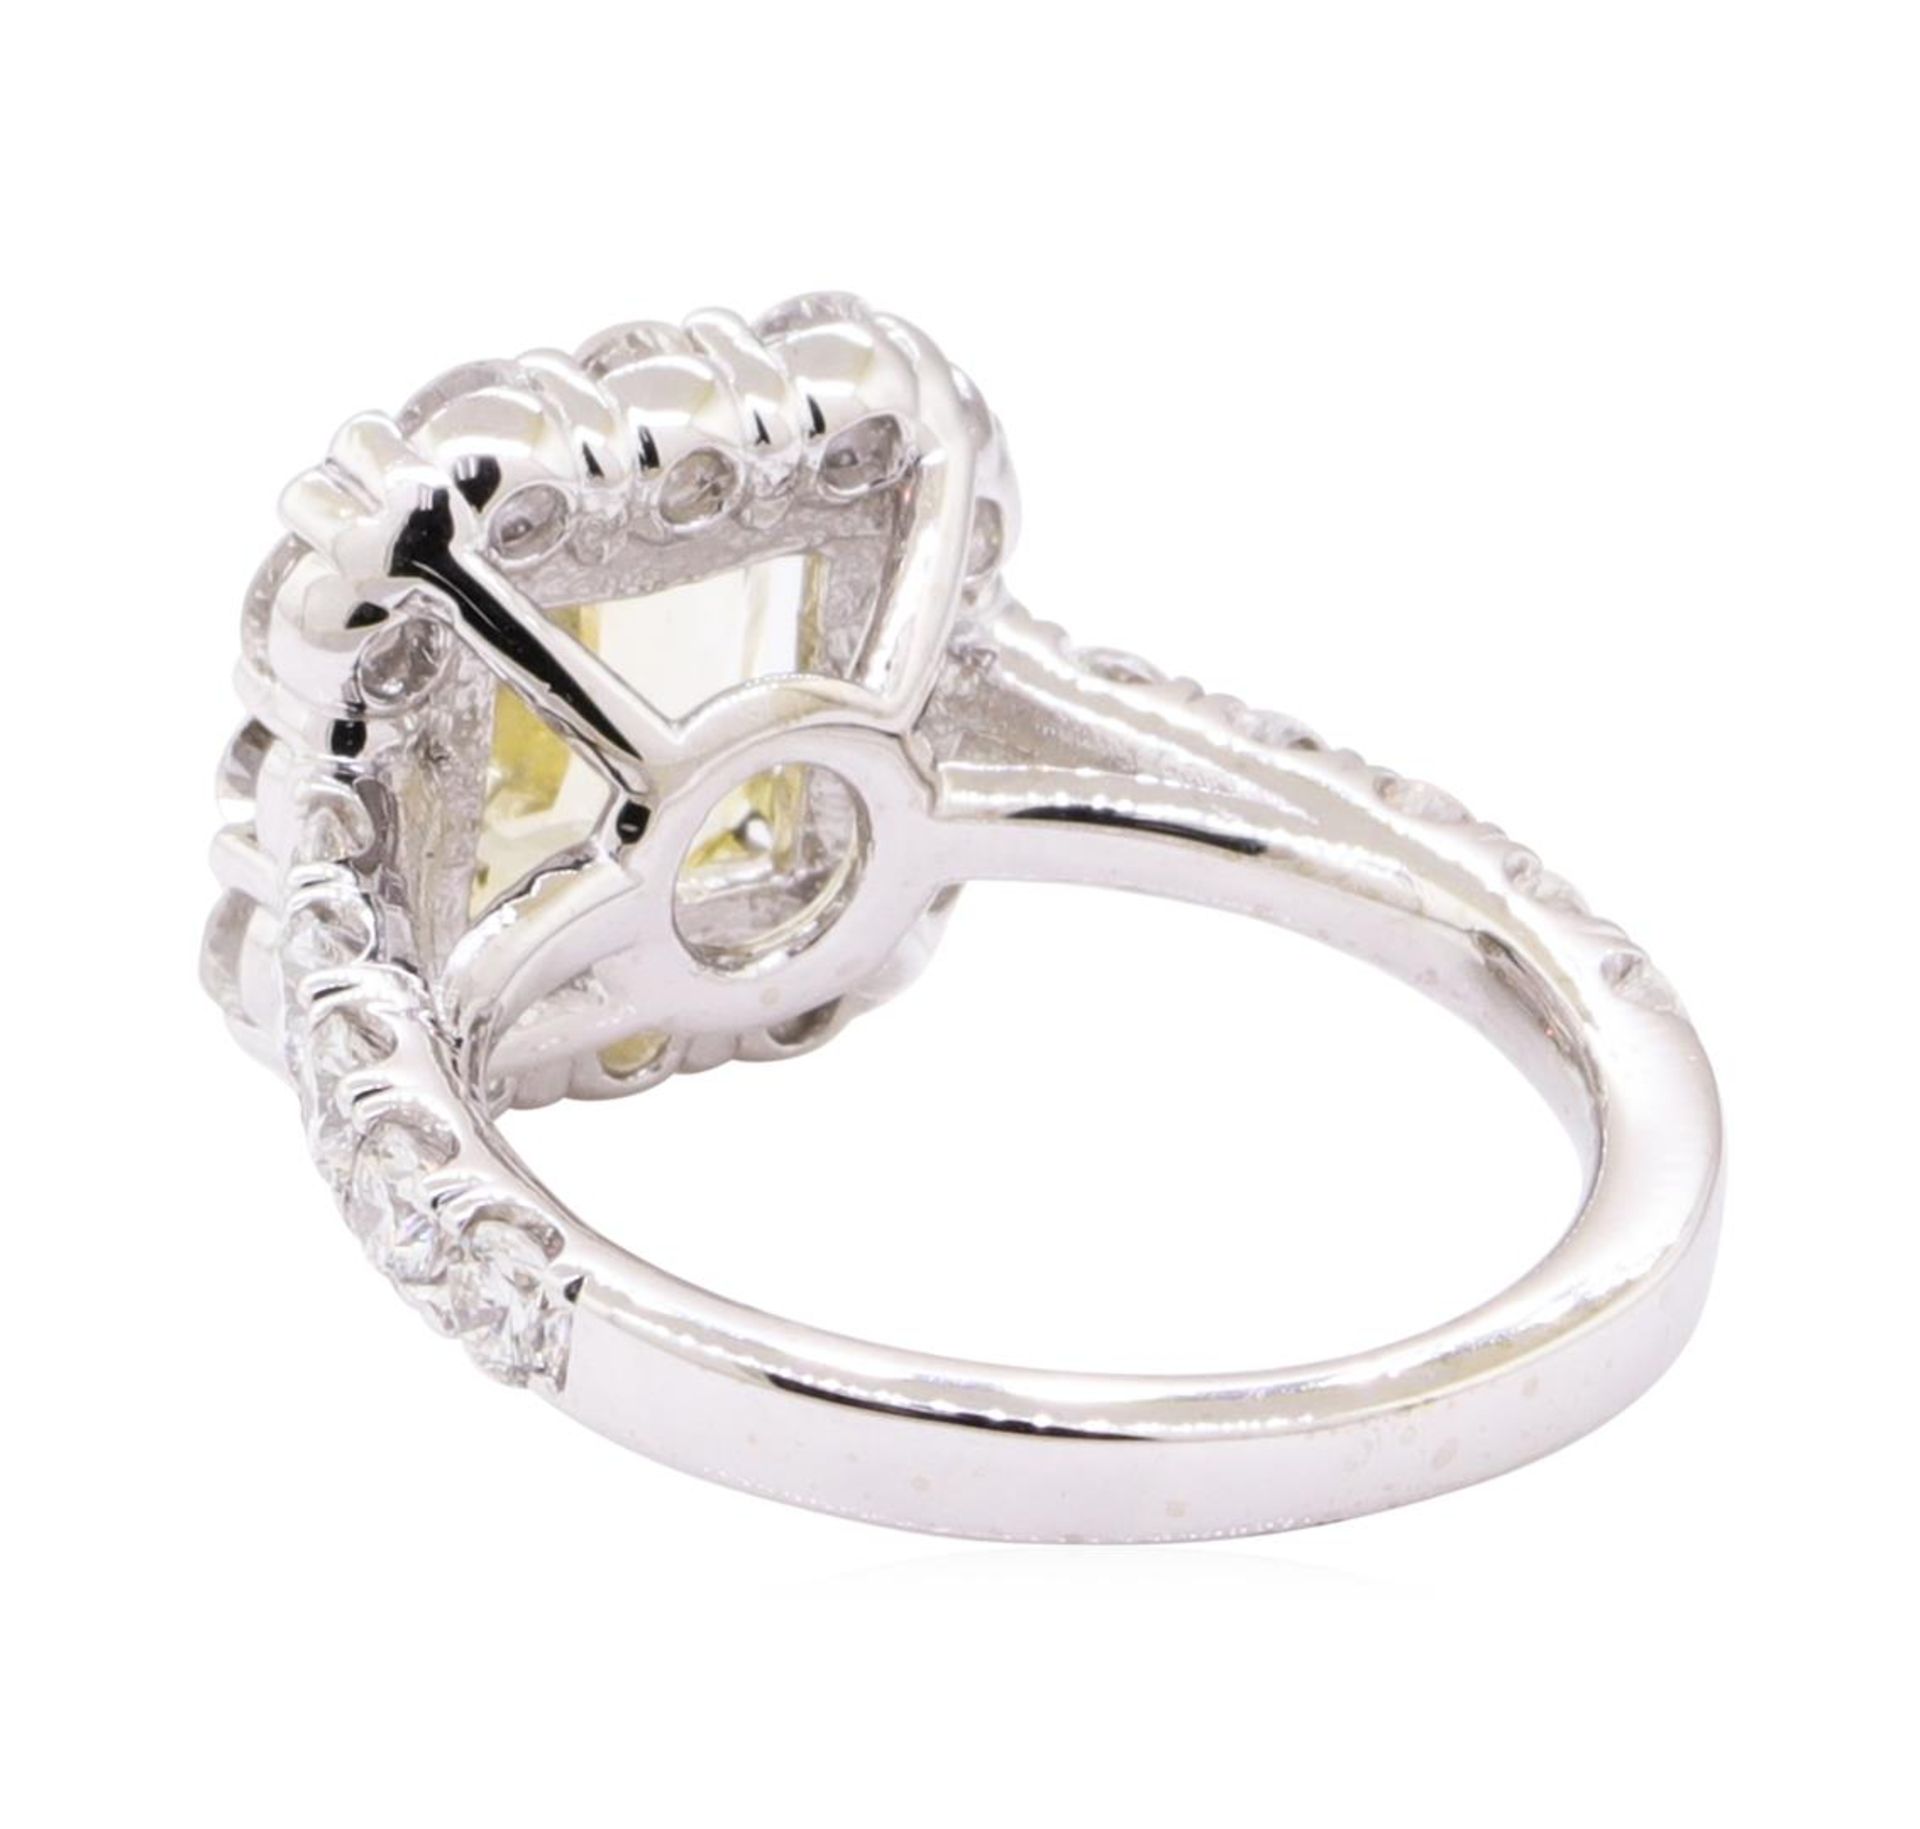 3.19 ctw Yellow Topaz And Diamond Ring - 18KT White Gold - Image 3 of 5